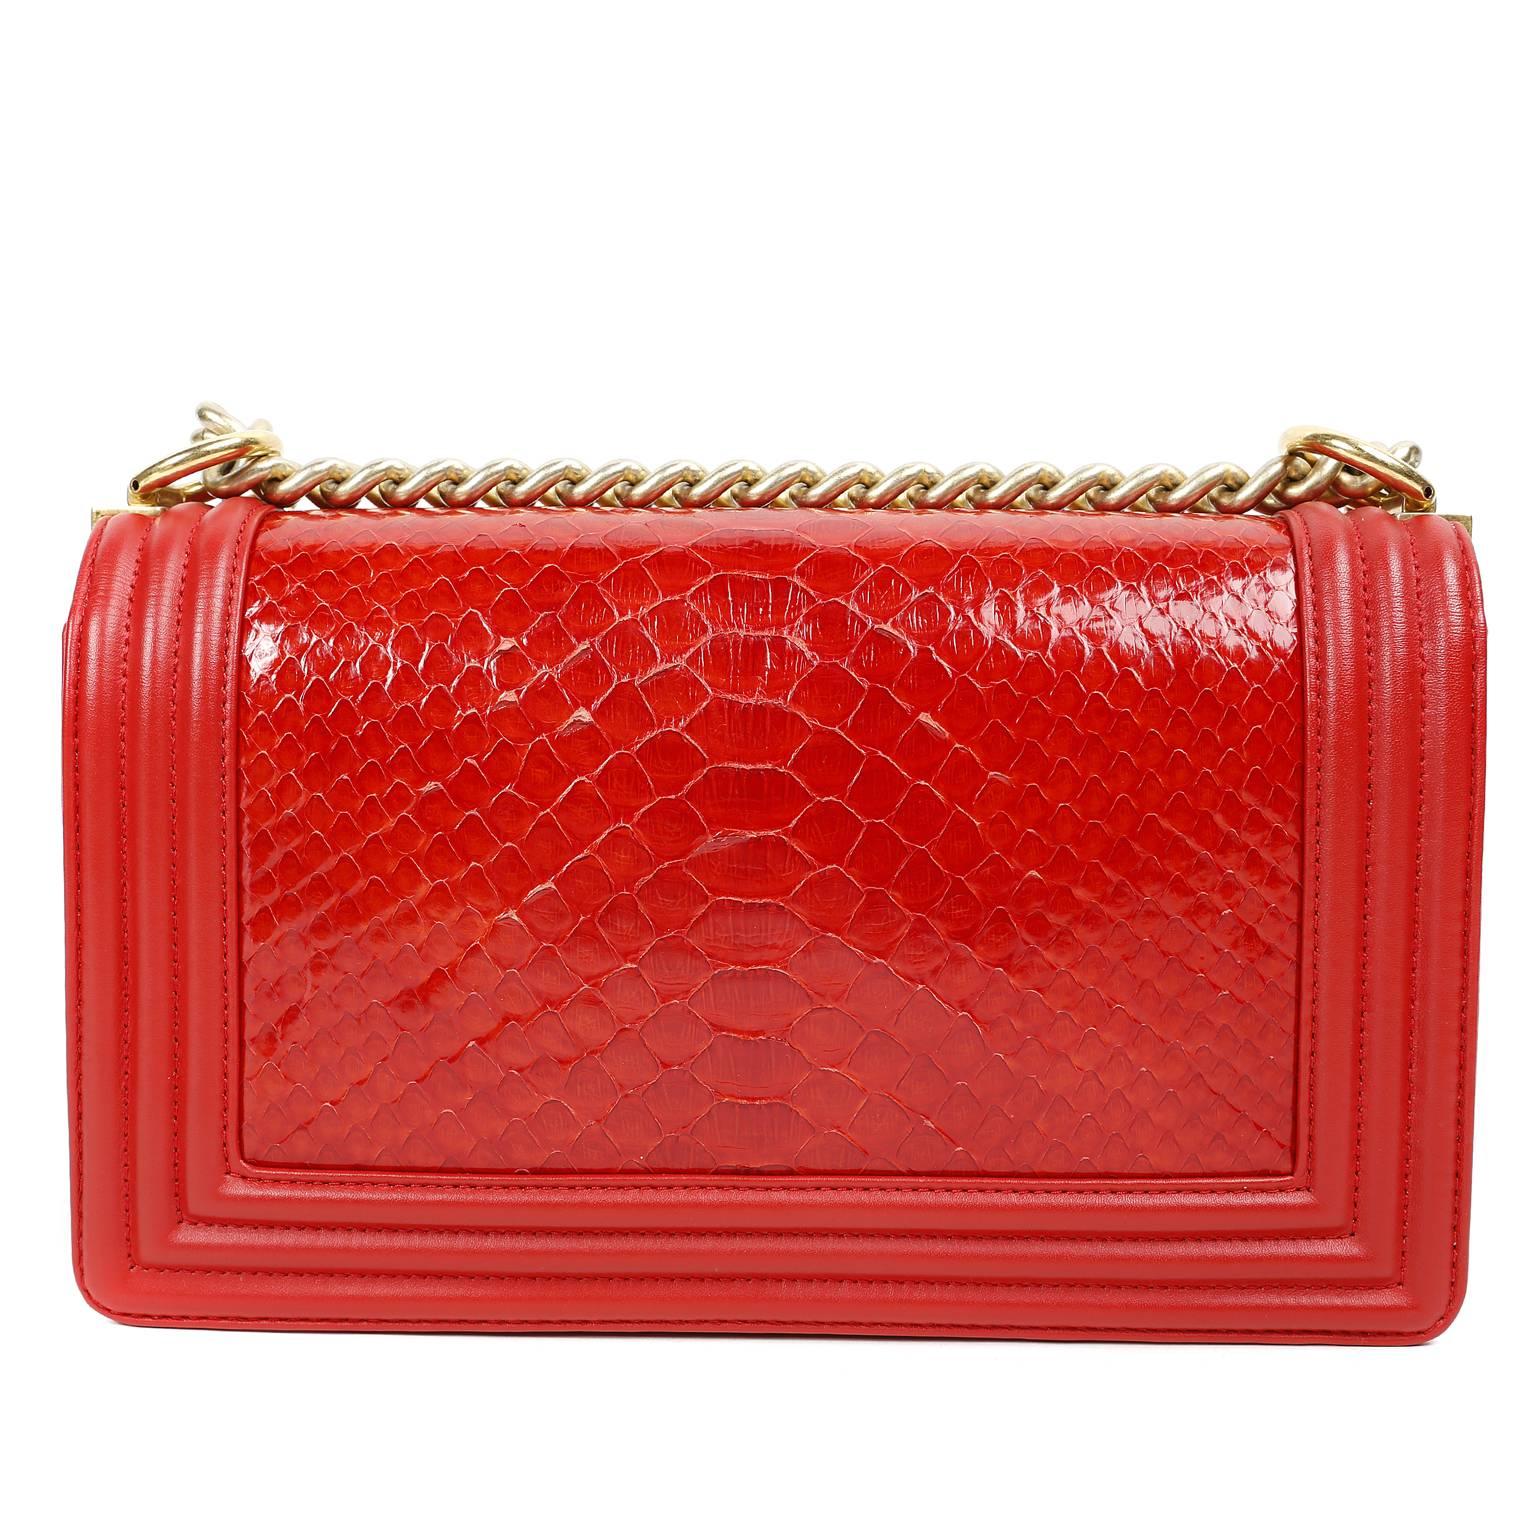 Chanel Red Python Medium Boy Bag- PRISTINE; Never Carried
 The updated style is breathtaking in this mesmerizing combination of exotic skin, leather and antiqued gold hardware.
 
Lipstick red python skin is framed in red welted leather trim,